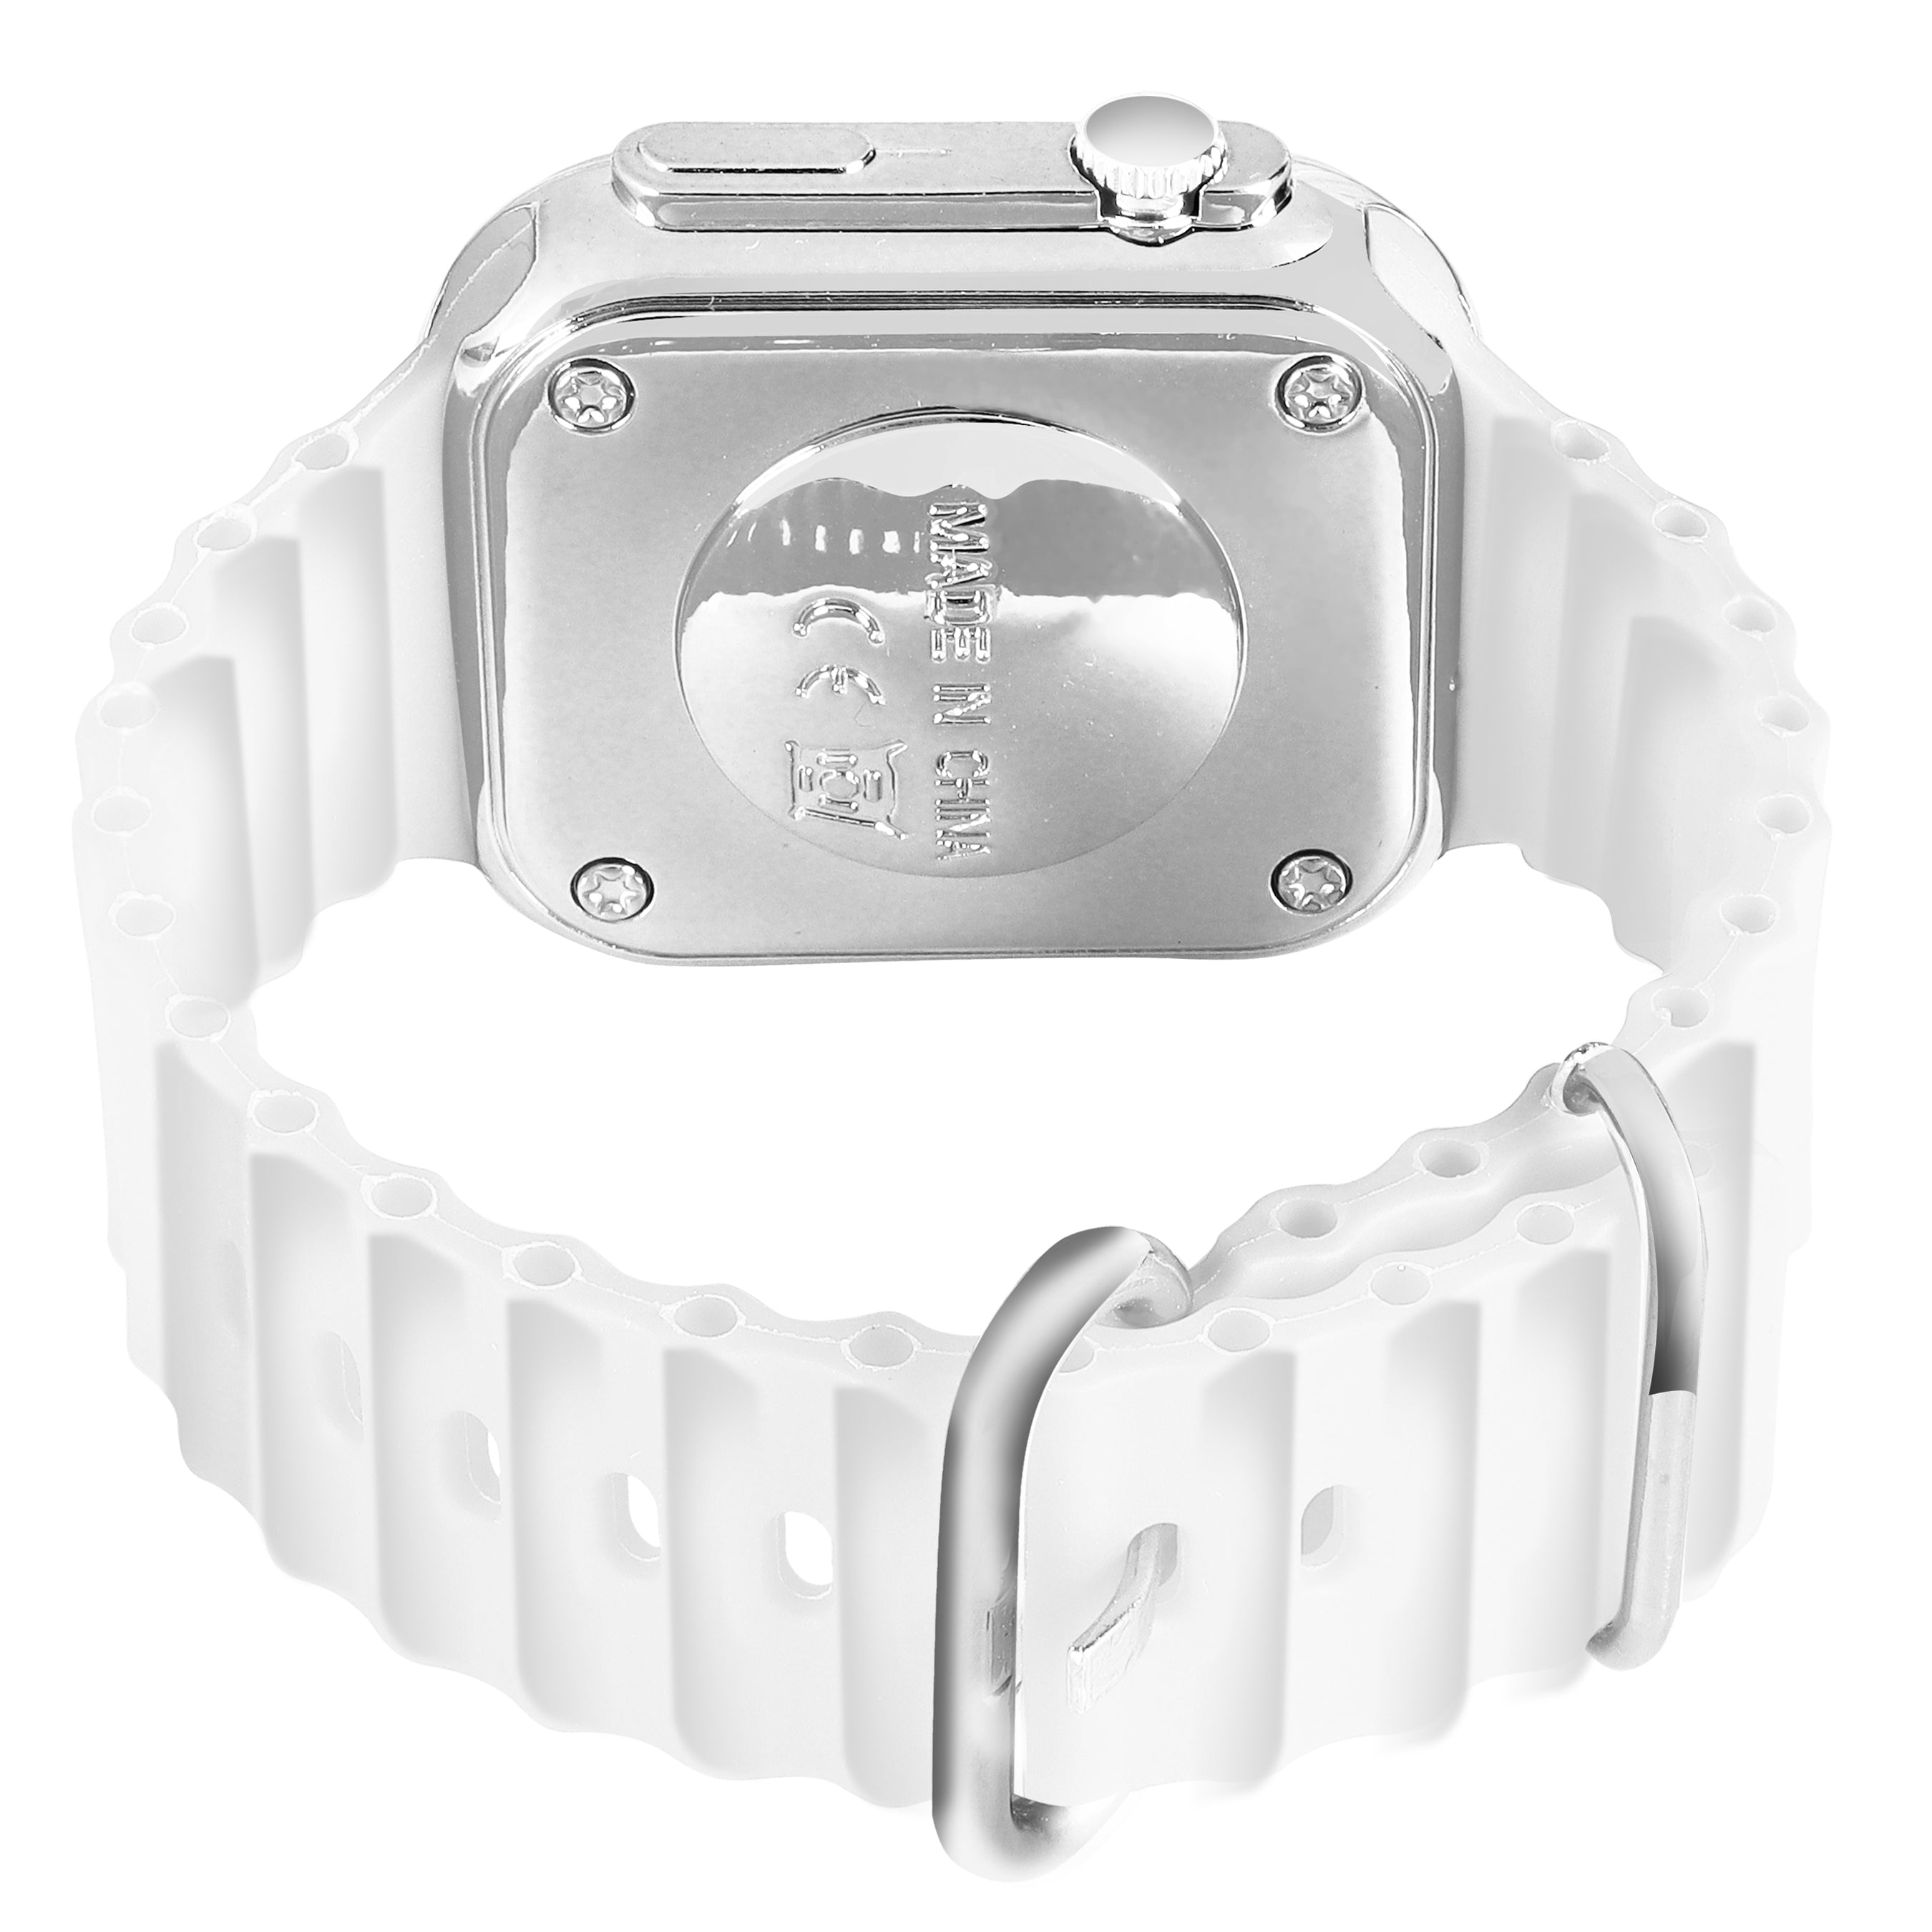 LOIS CARON D-1035 Teenagers LED Luxurious Fashion Silicone White Colored Digital Watch - For Boys & Girls